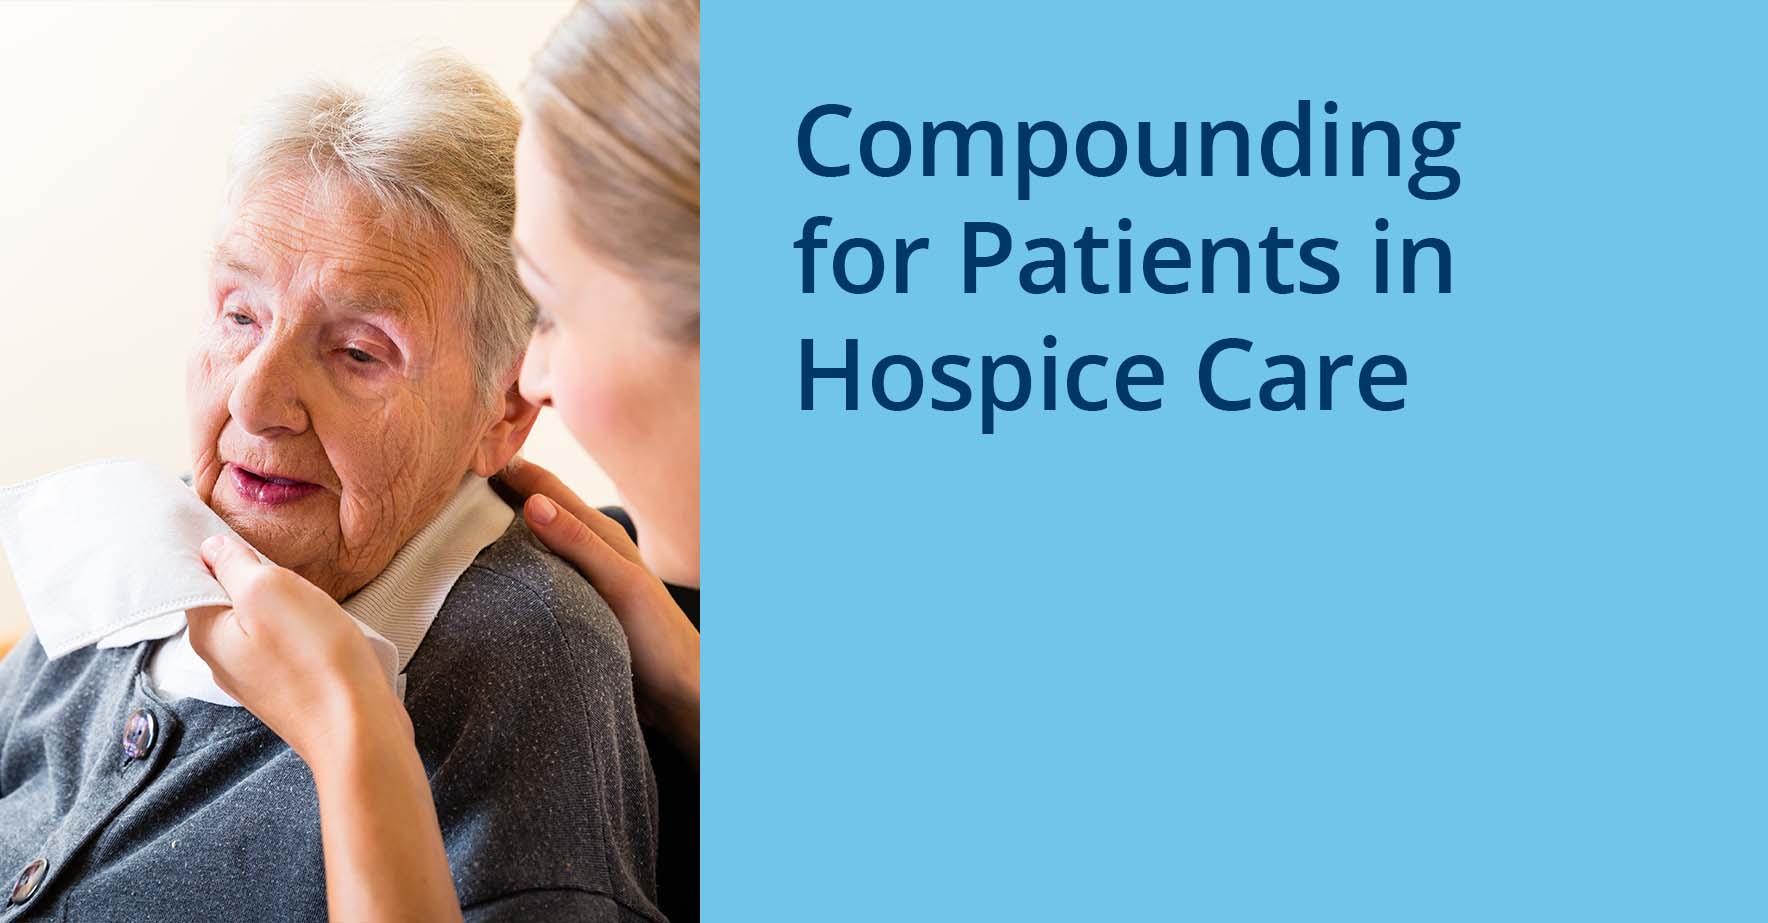 gompounding_for_patients_in_hospice_care.jpg